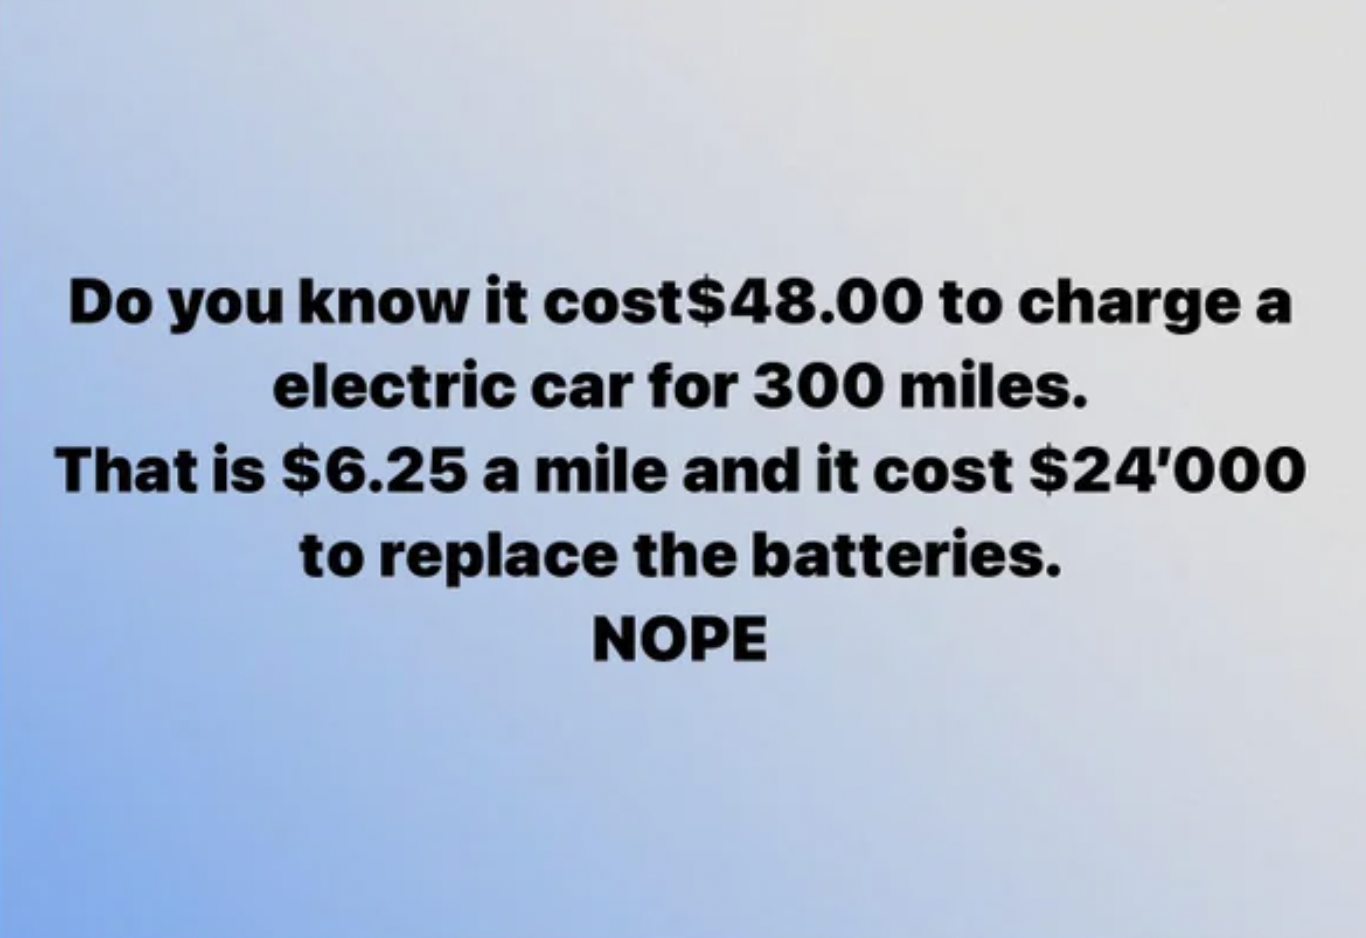 Insane People of Facebook - sky - Do you know it cost $48.00 to charge a electric car for 300 miles. That is $6.25 a mile and it cost $24'000 to replace the batteries. Nope